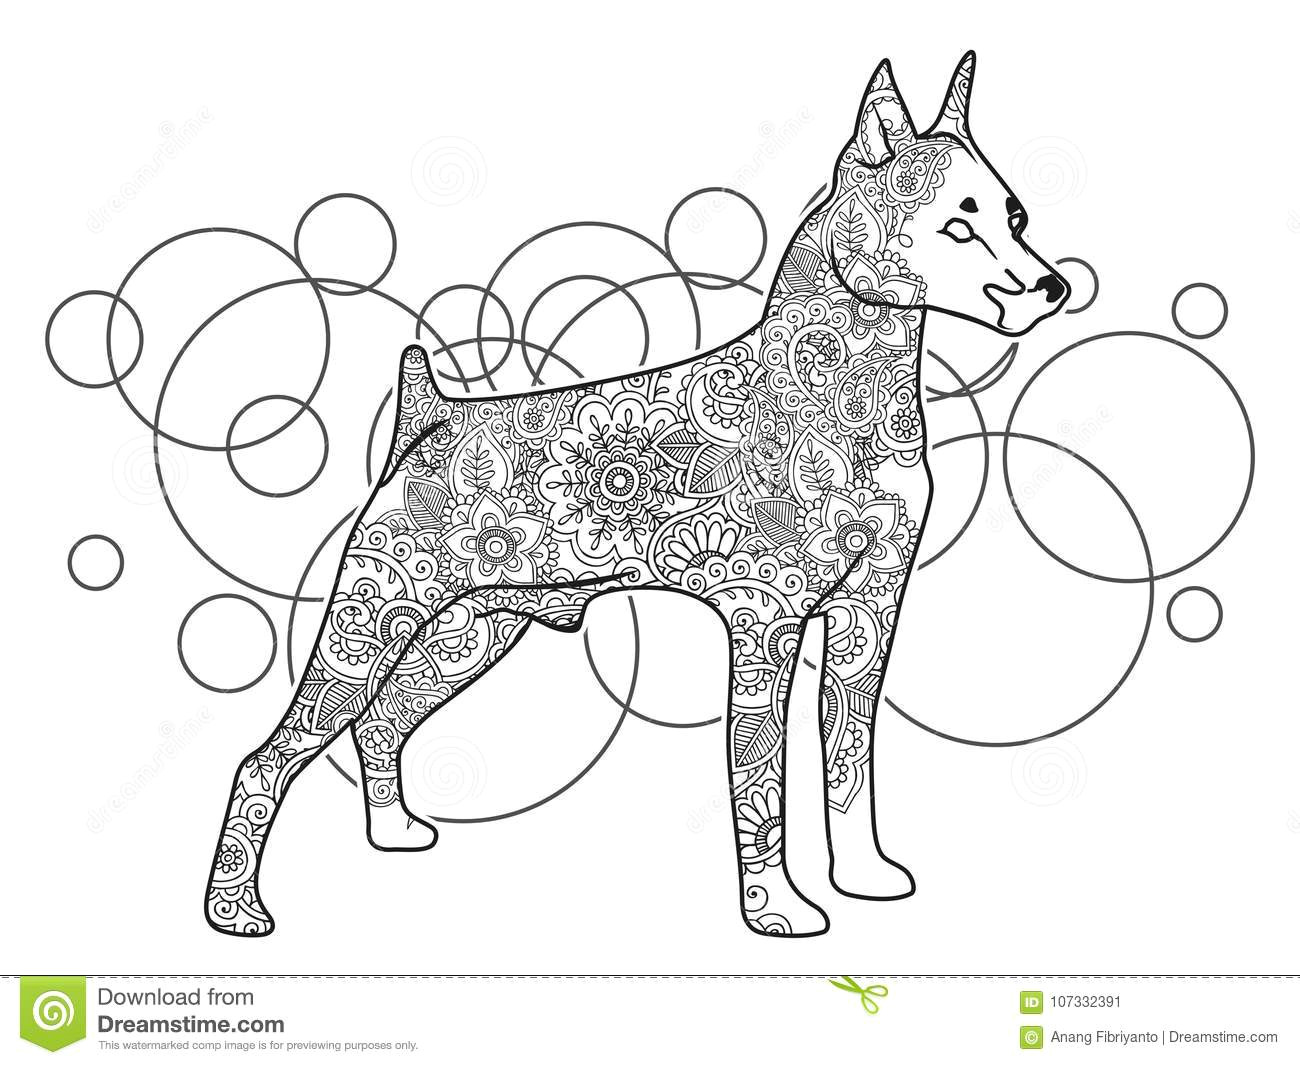 Drawing Dog Doodle Black and White Hand Drawn Dog In Doodle Animal Paisley Adult Stress